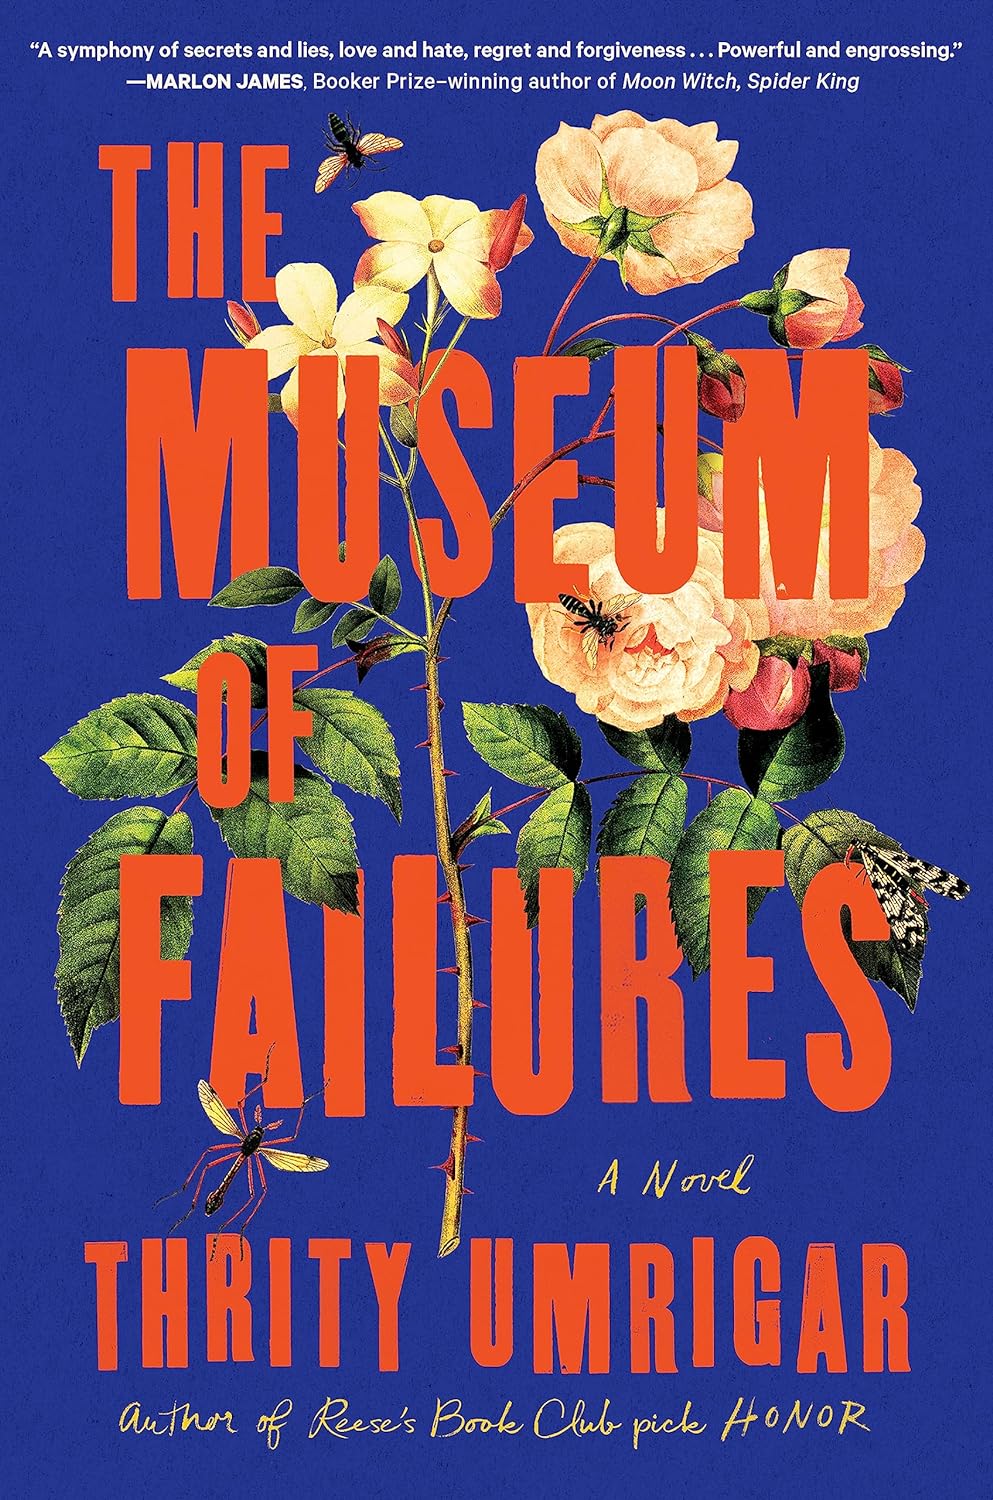 Image for "The Museum of Failures"